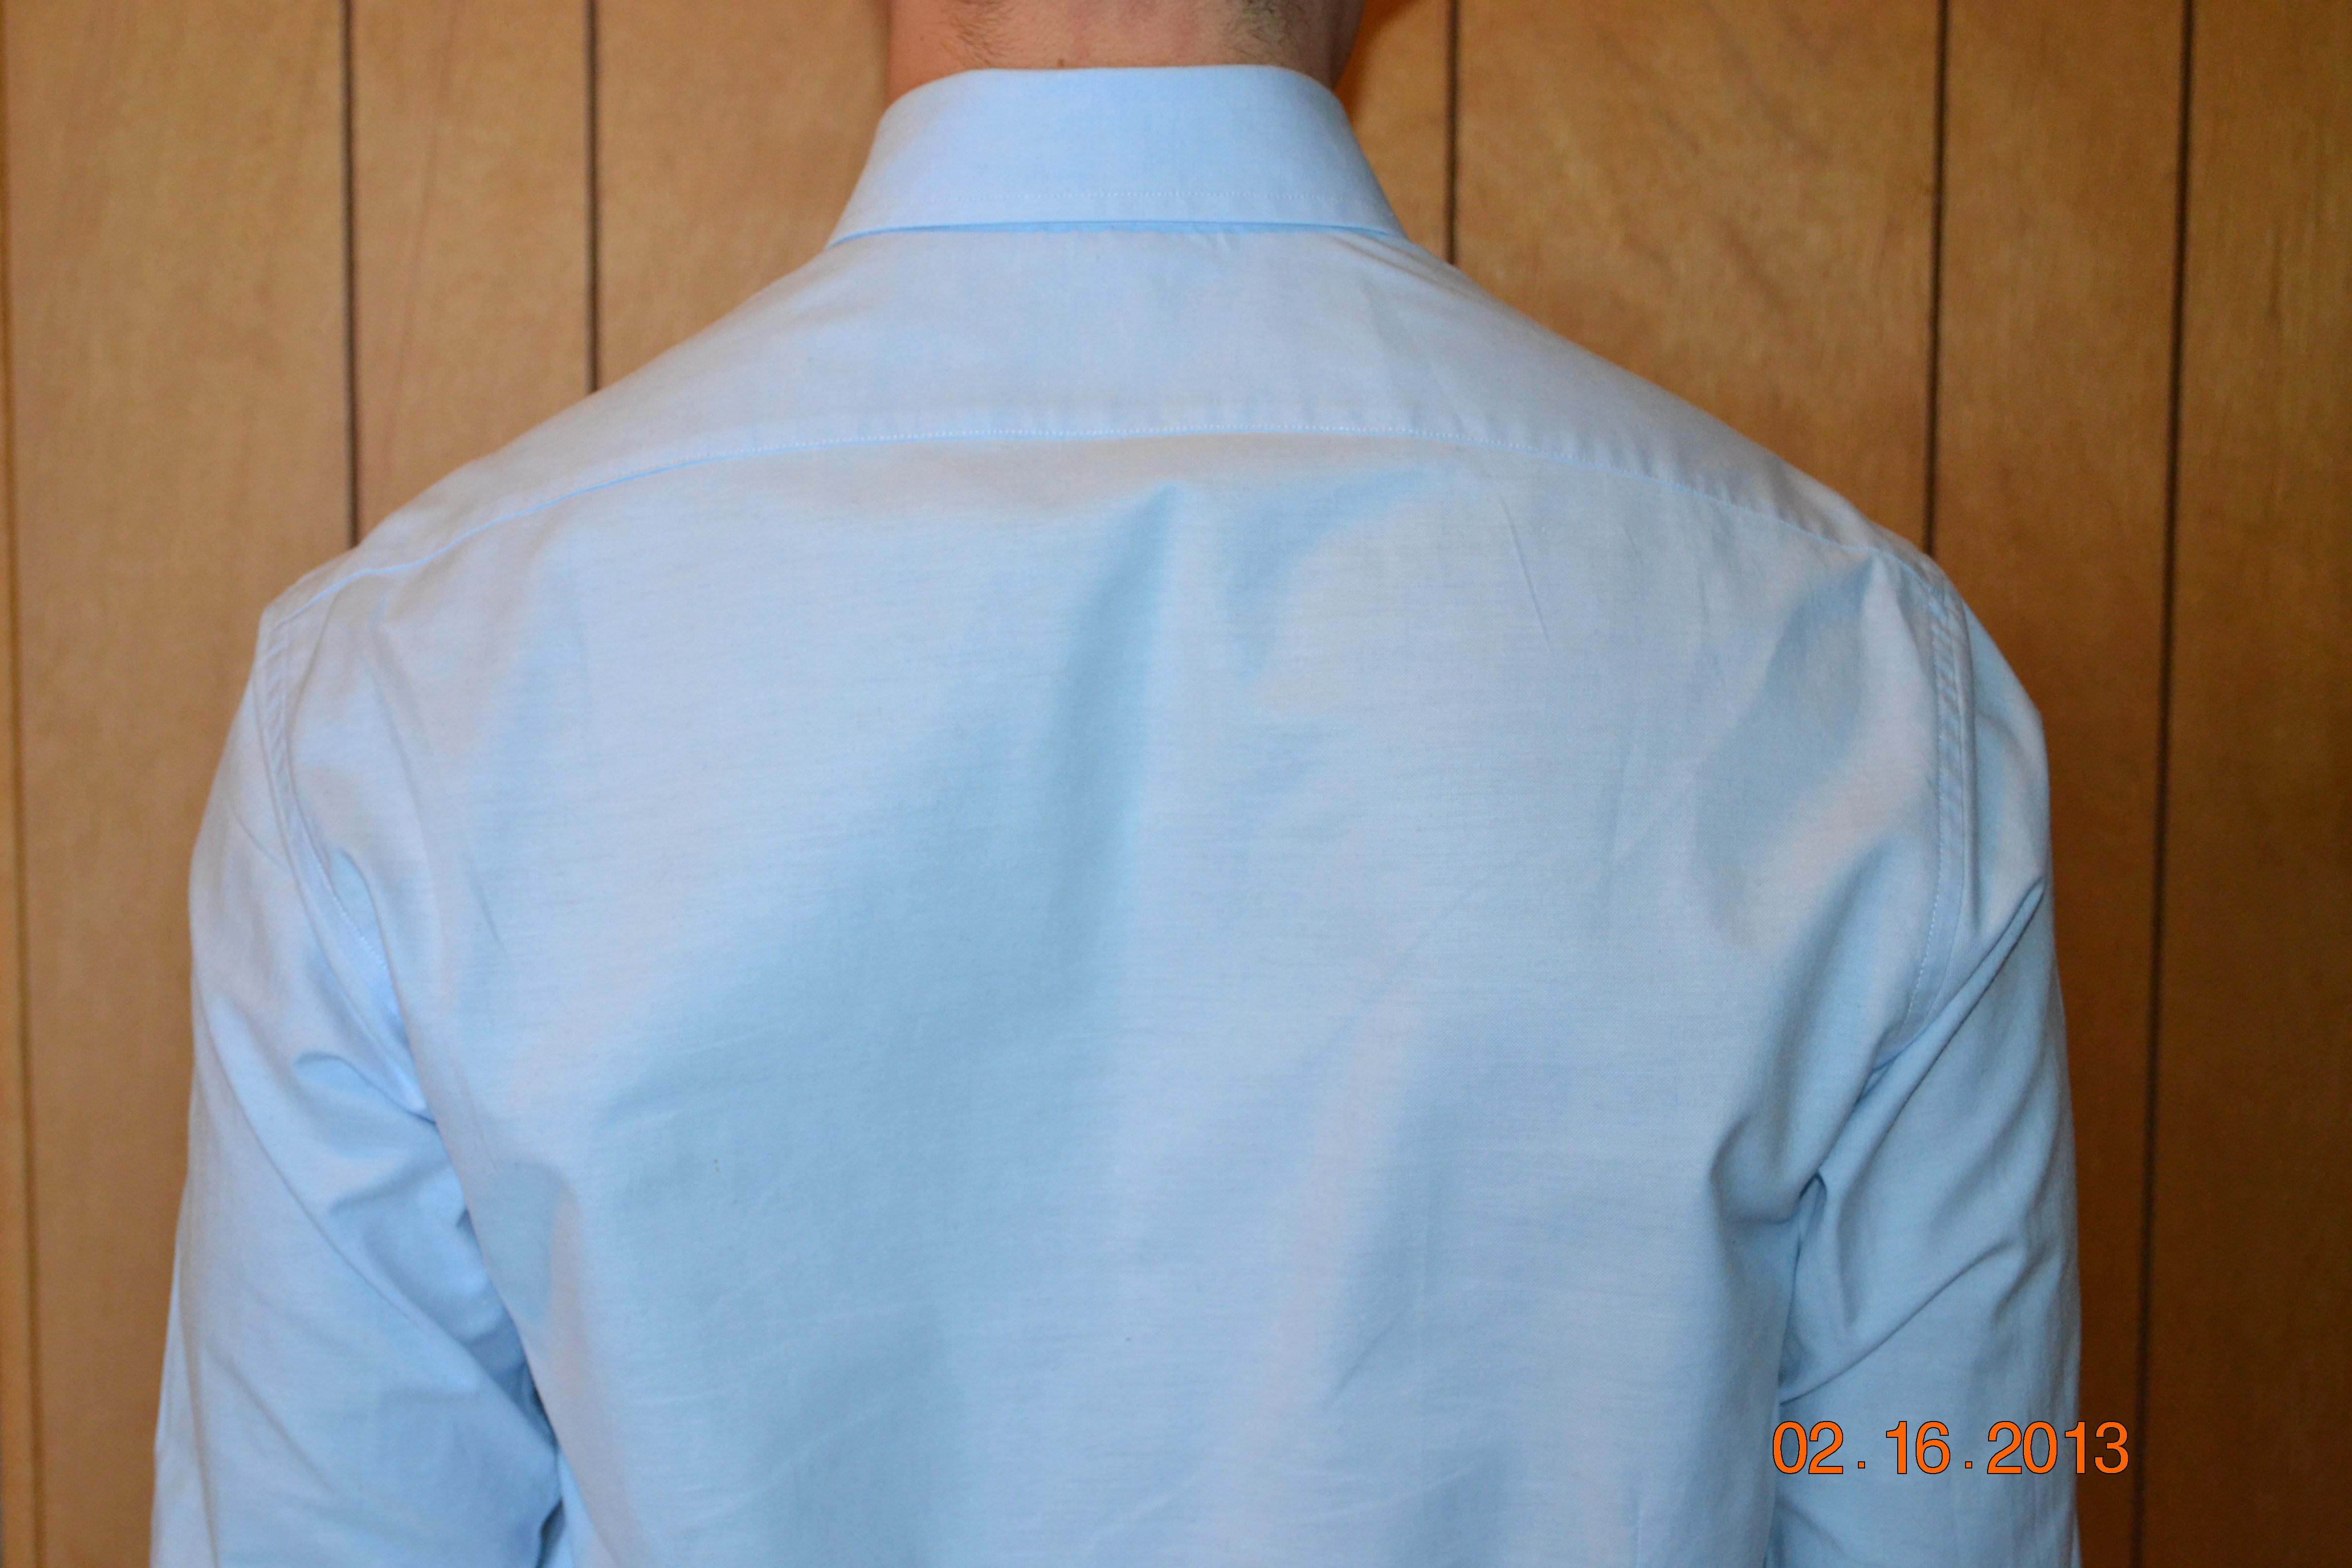 Bespoke shirt - why would there be a crease running to my armpit ...